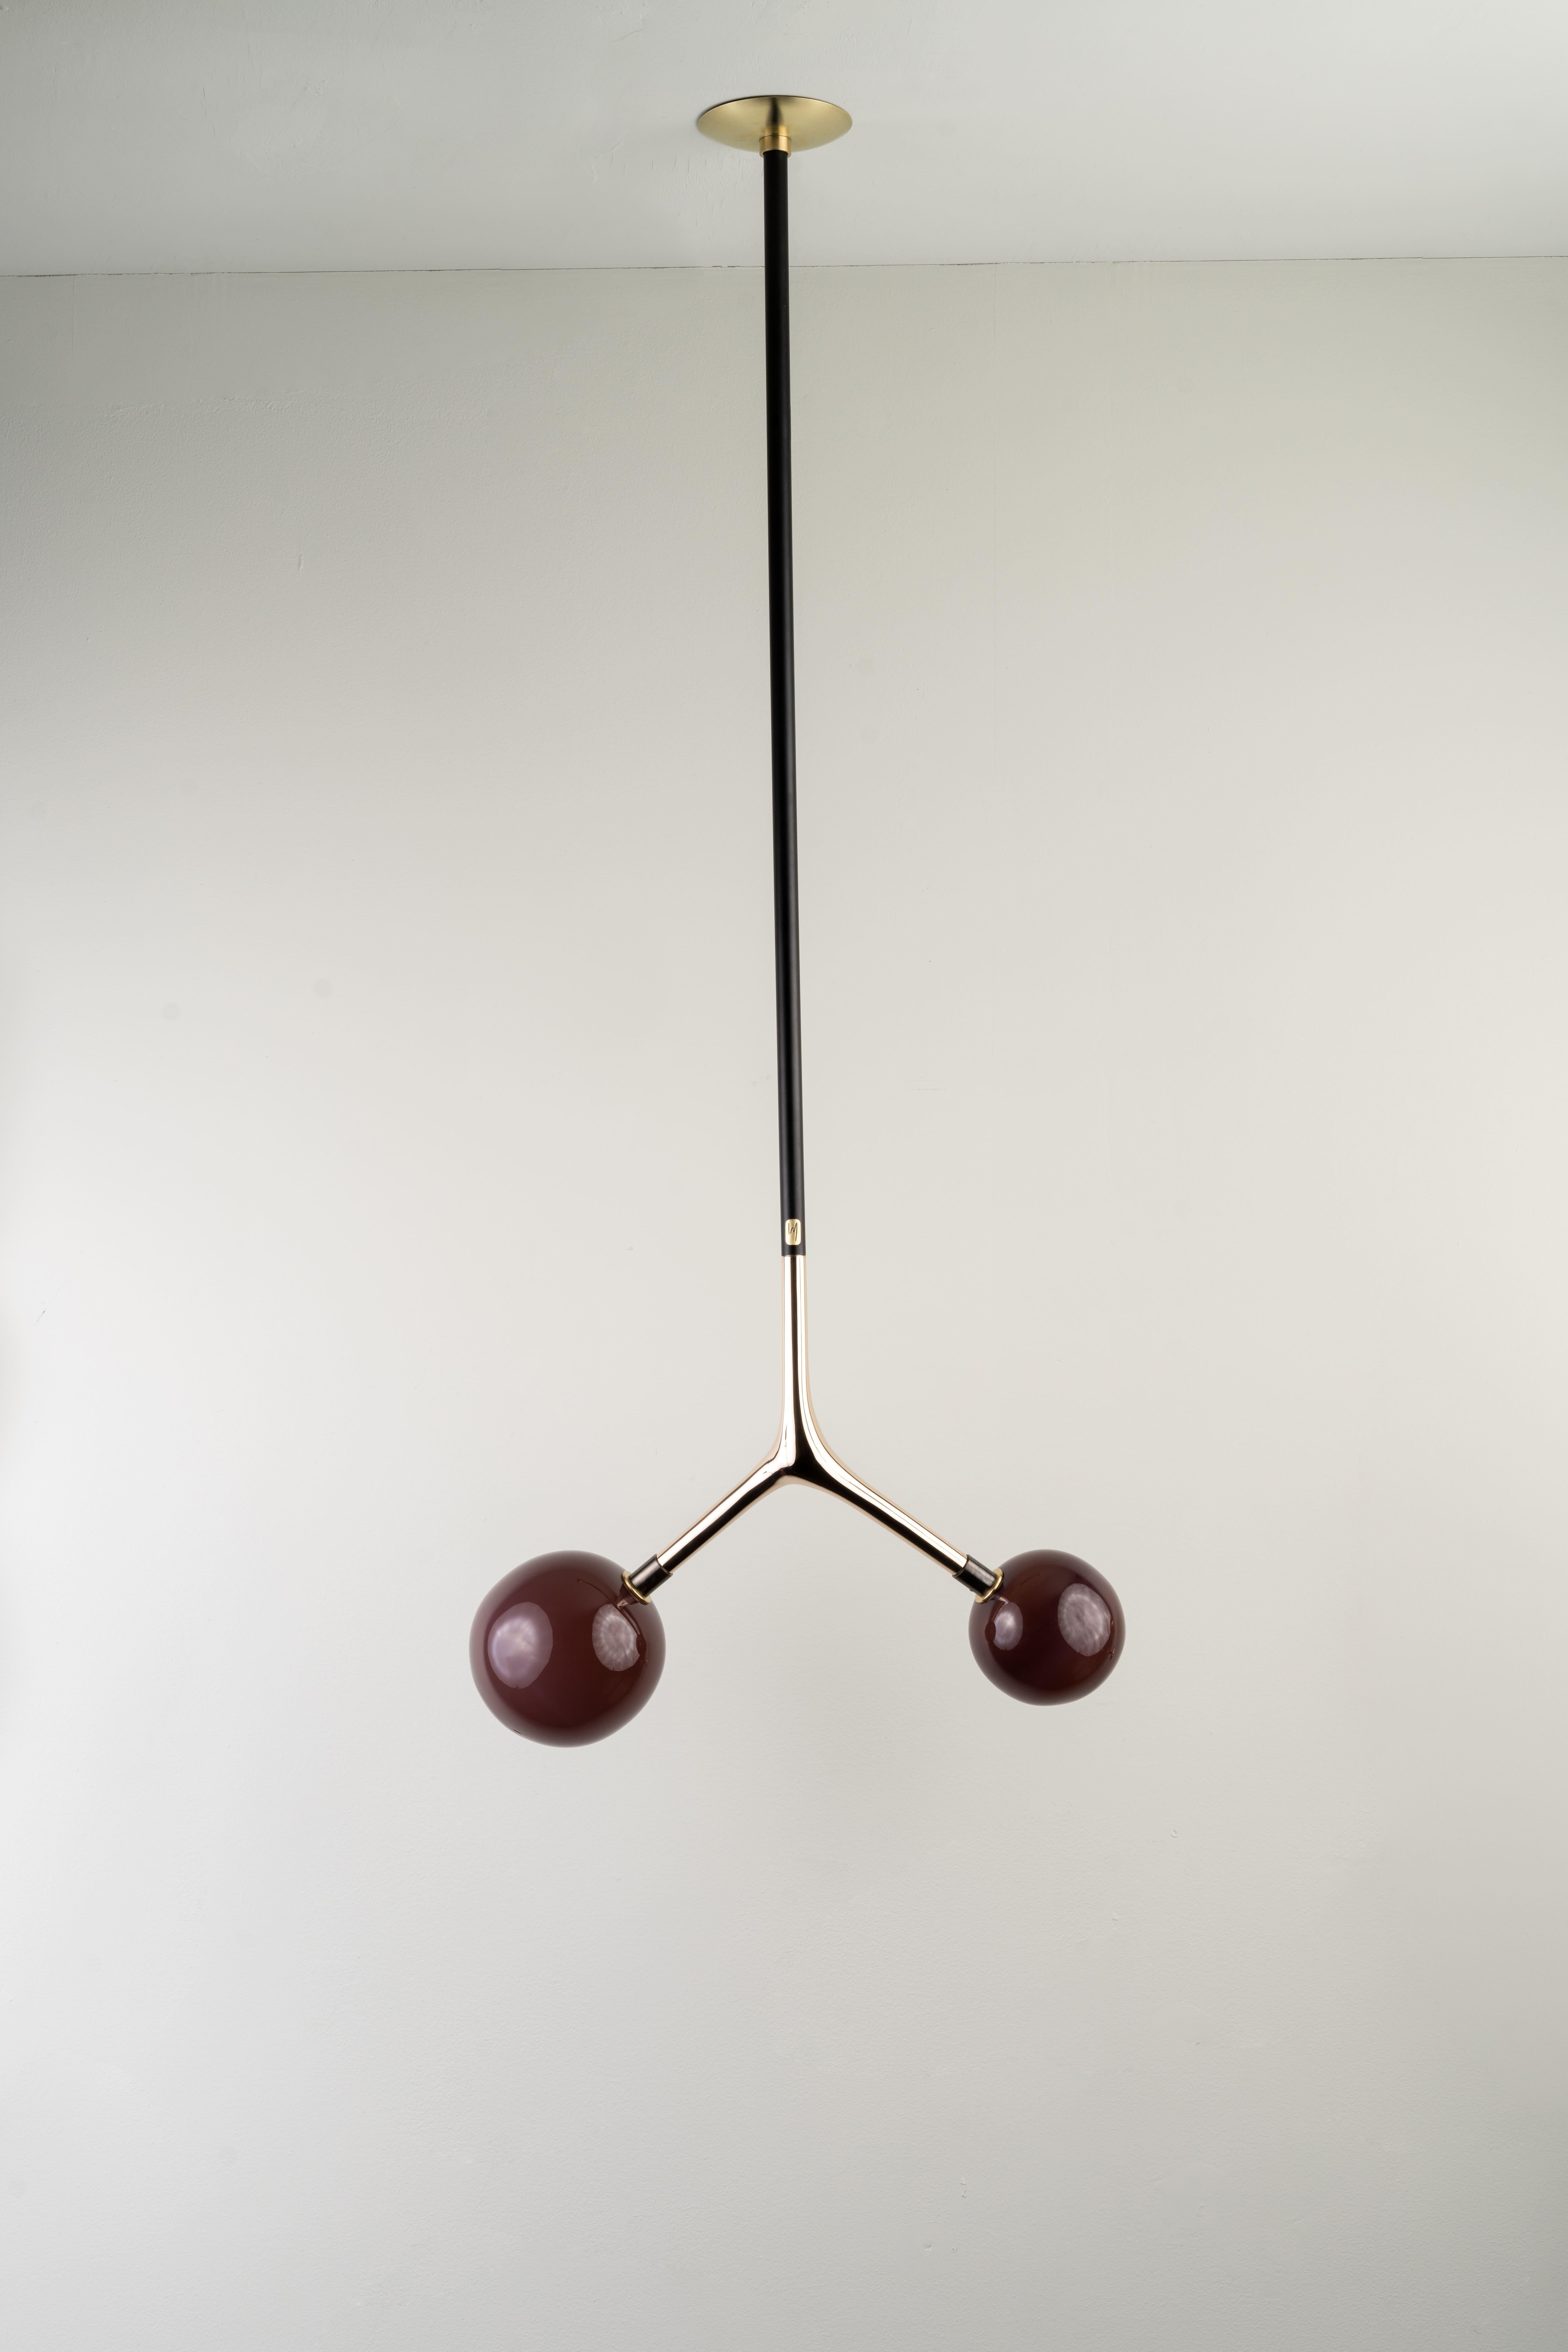 Mexican Organic Modern Hanging Light Lost-Wax Bronze Blown Glass Globes For Sale